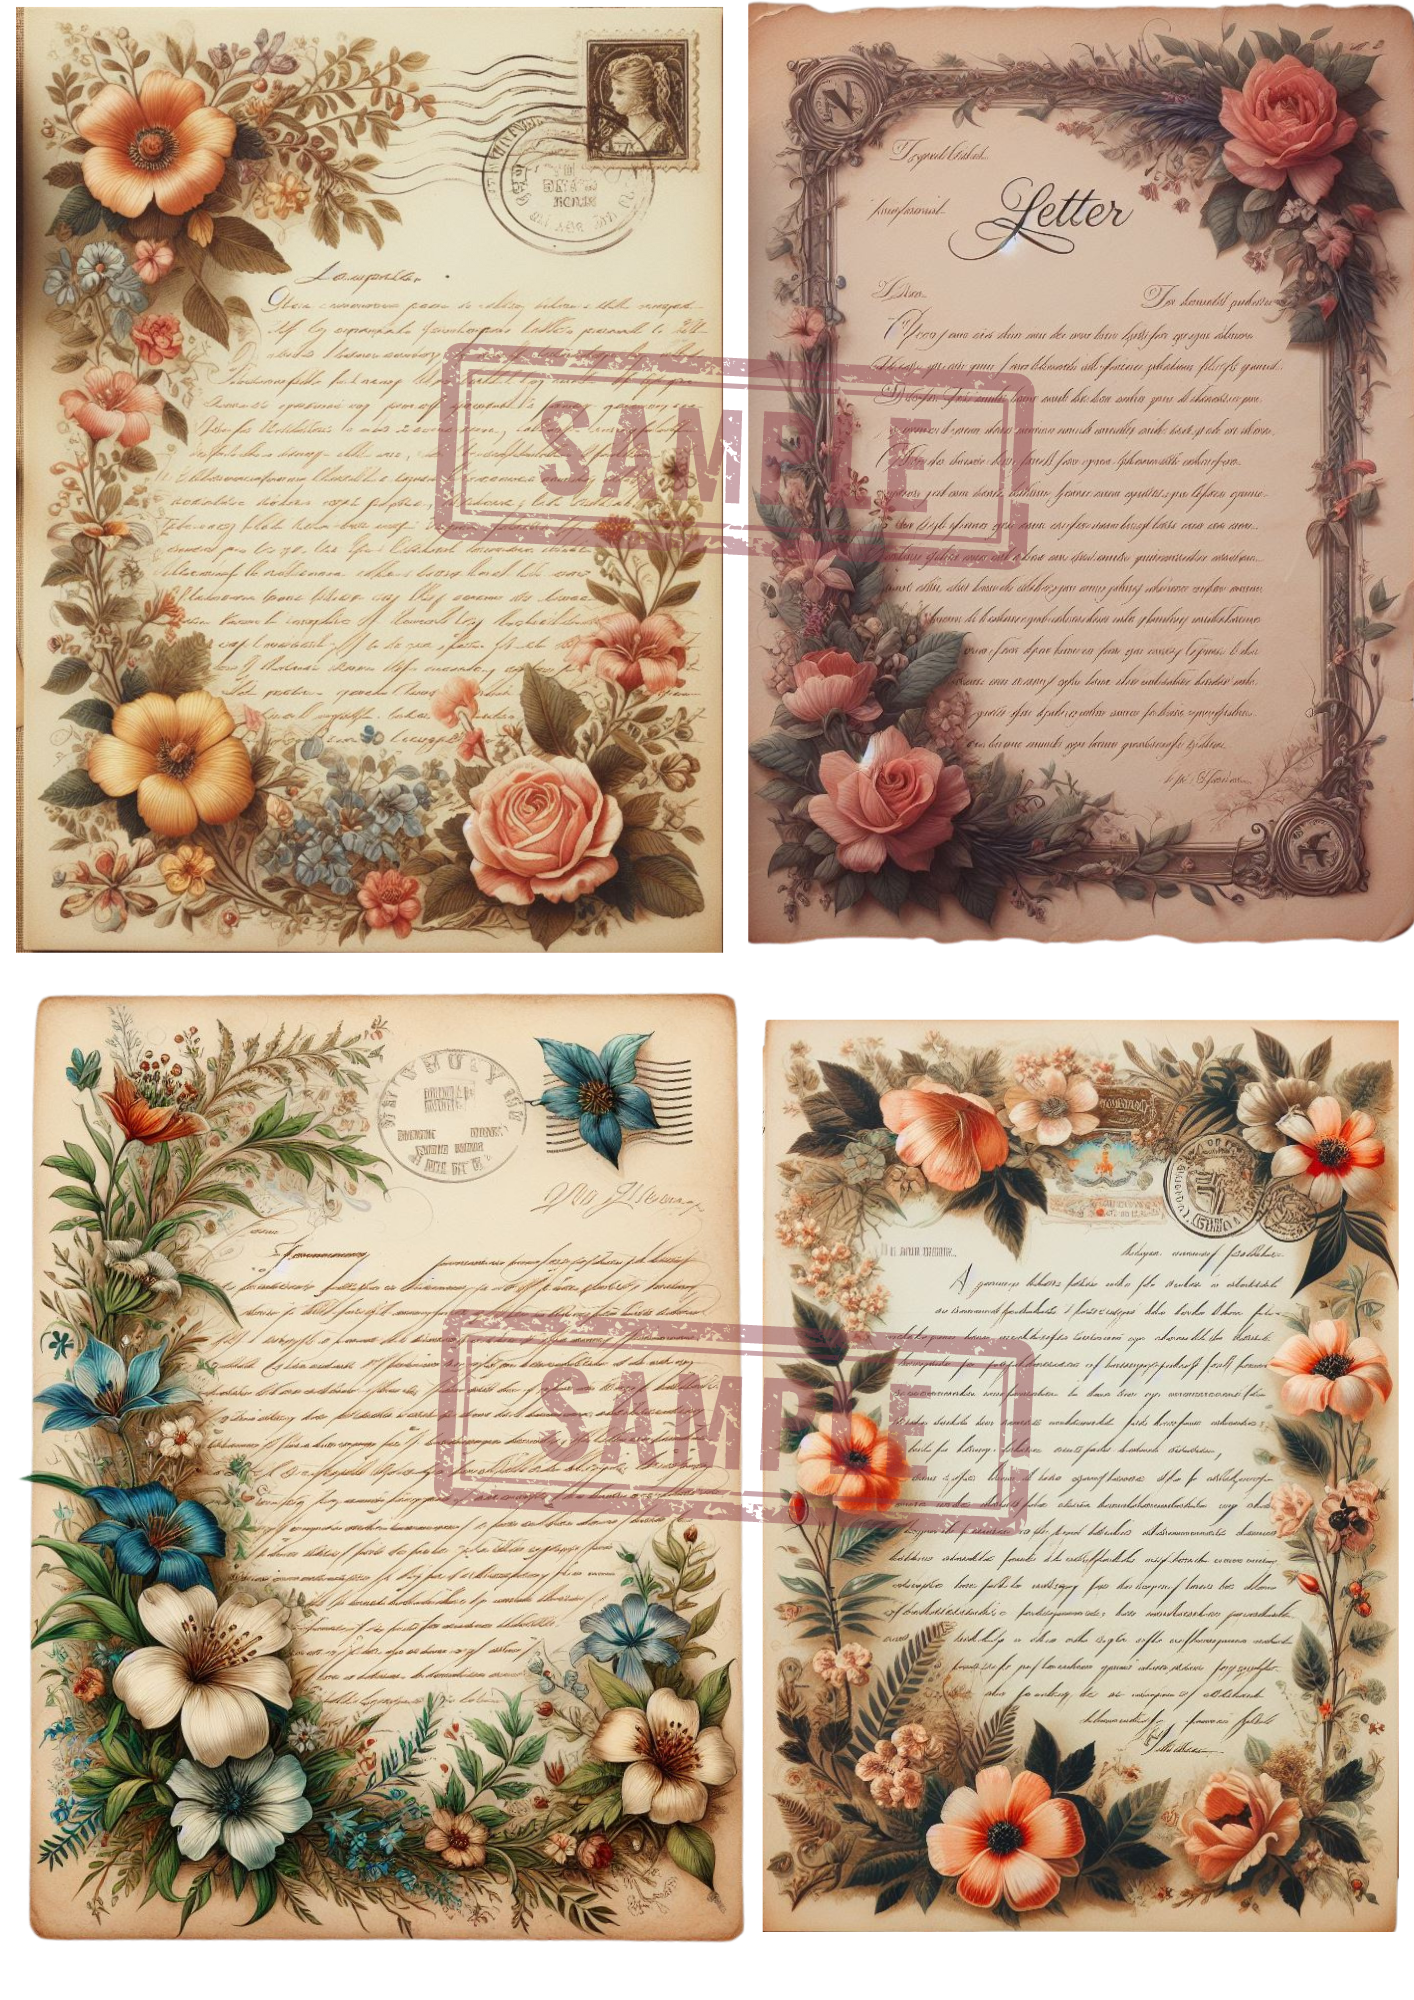 Free Digital Vintage Floral Ephemera Old Letters Printable Download A4 Sheet Page Collage Decoupage Cut Outs Creative Journaling Scrapbooking Art Junk Journal